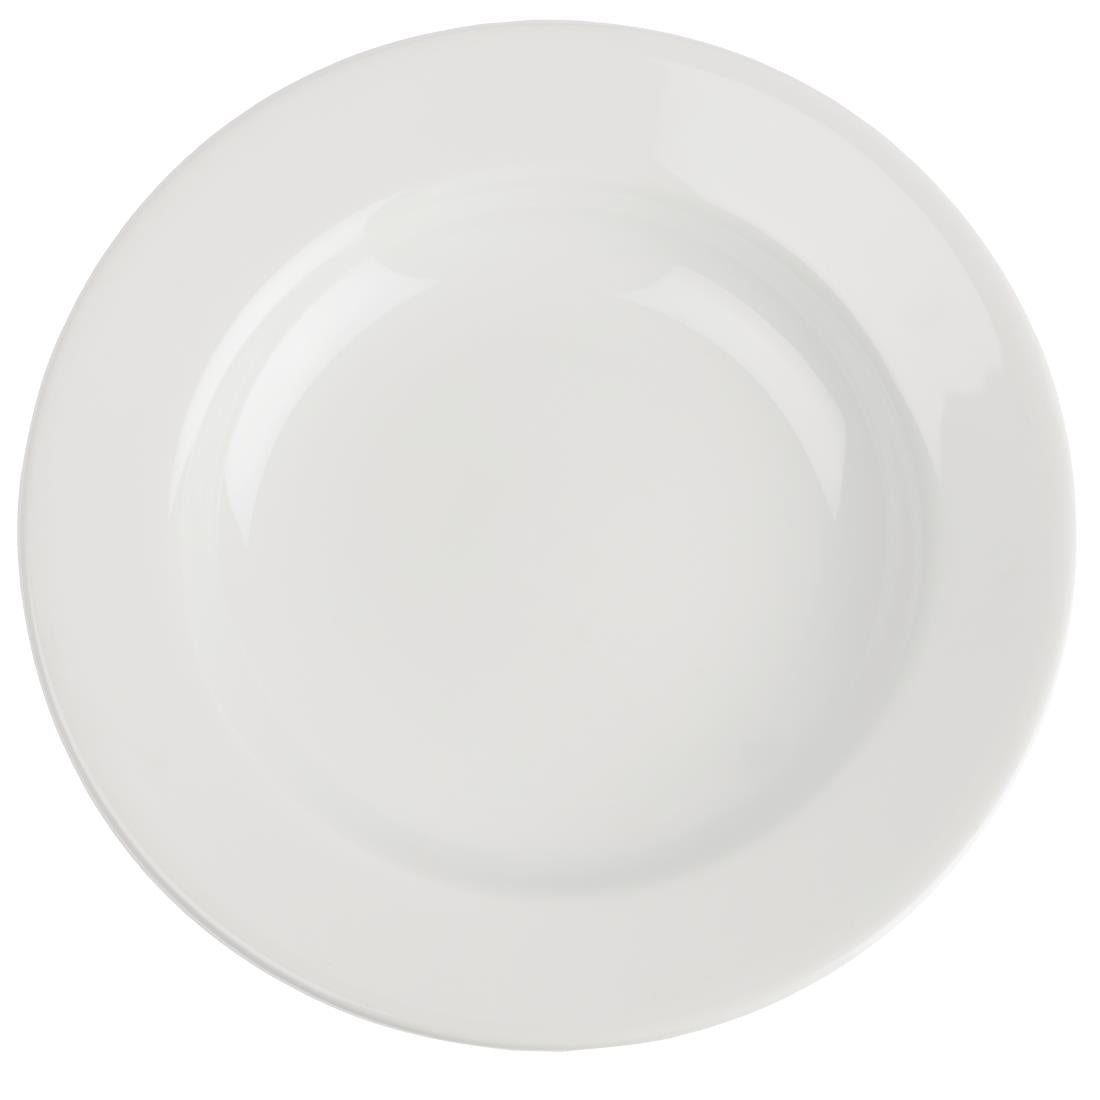 Royal Porcelain Classic White Pasta Plates 300mm (Pack of 12)